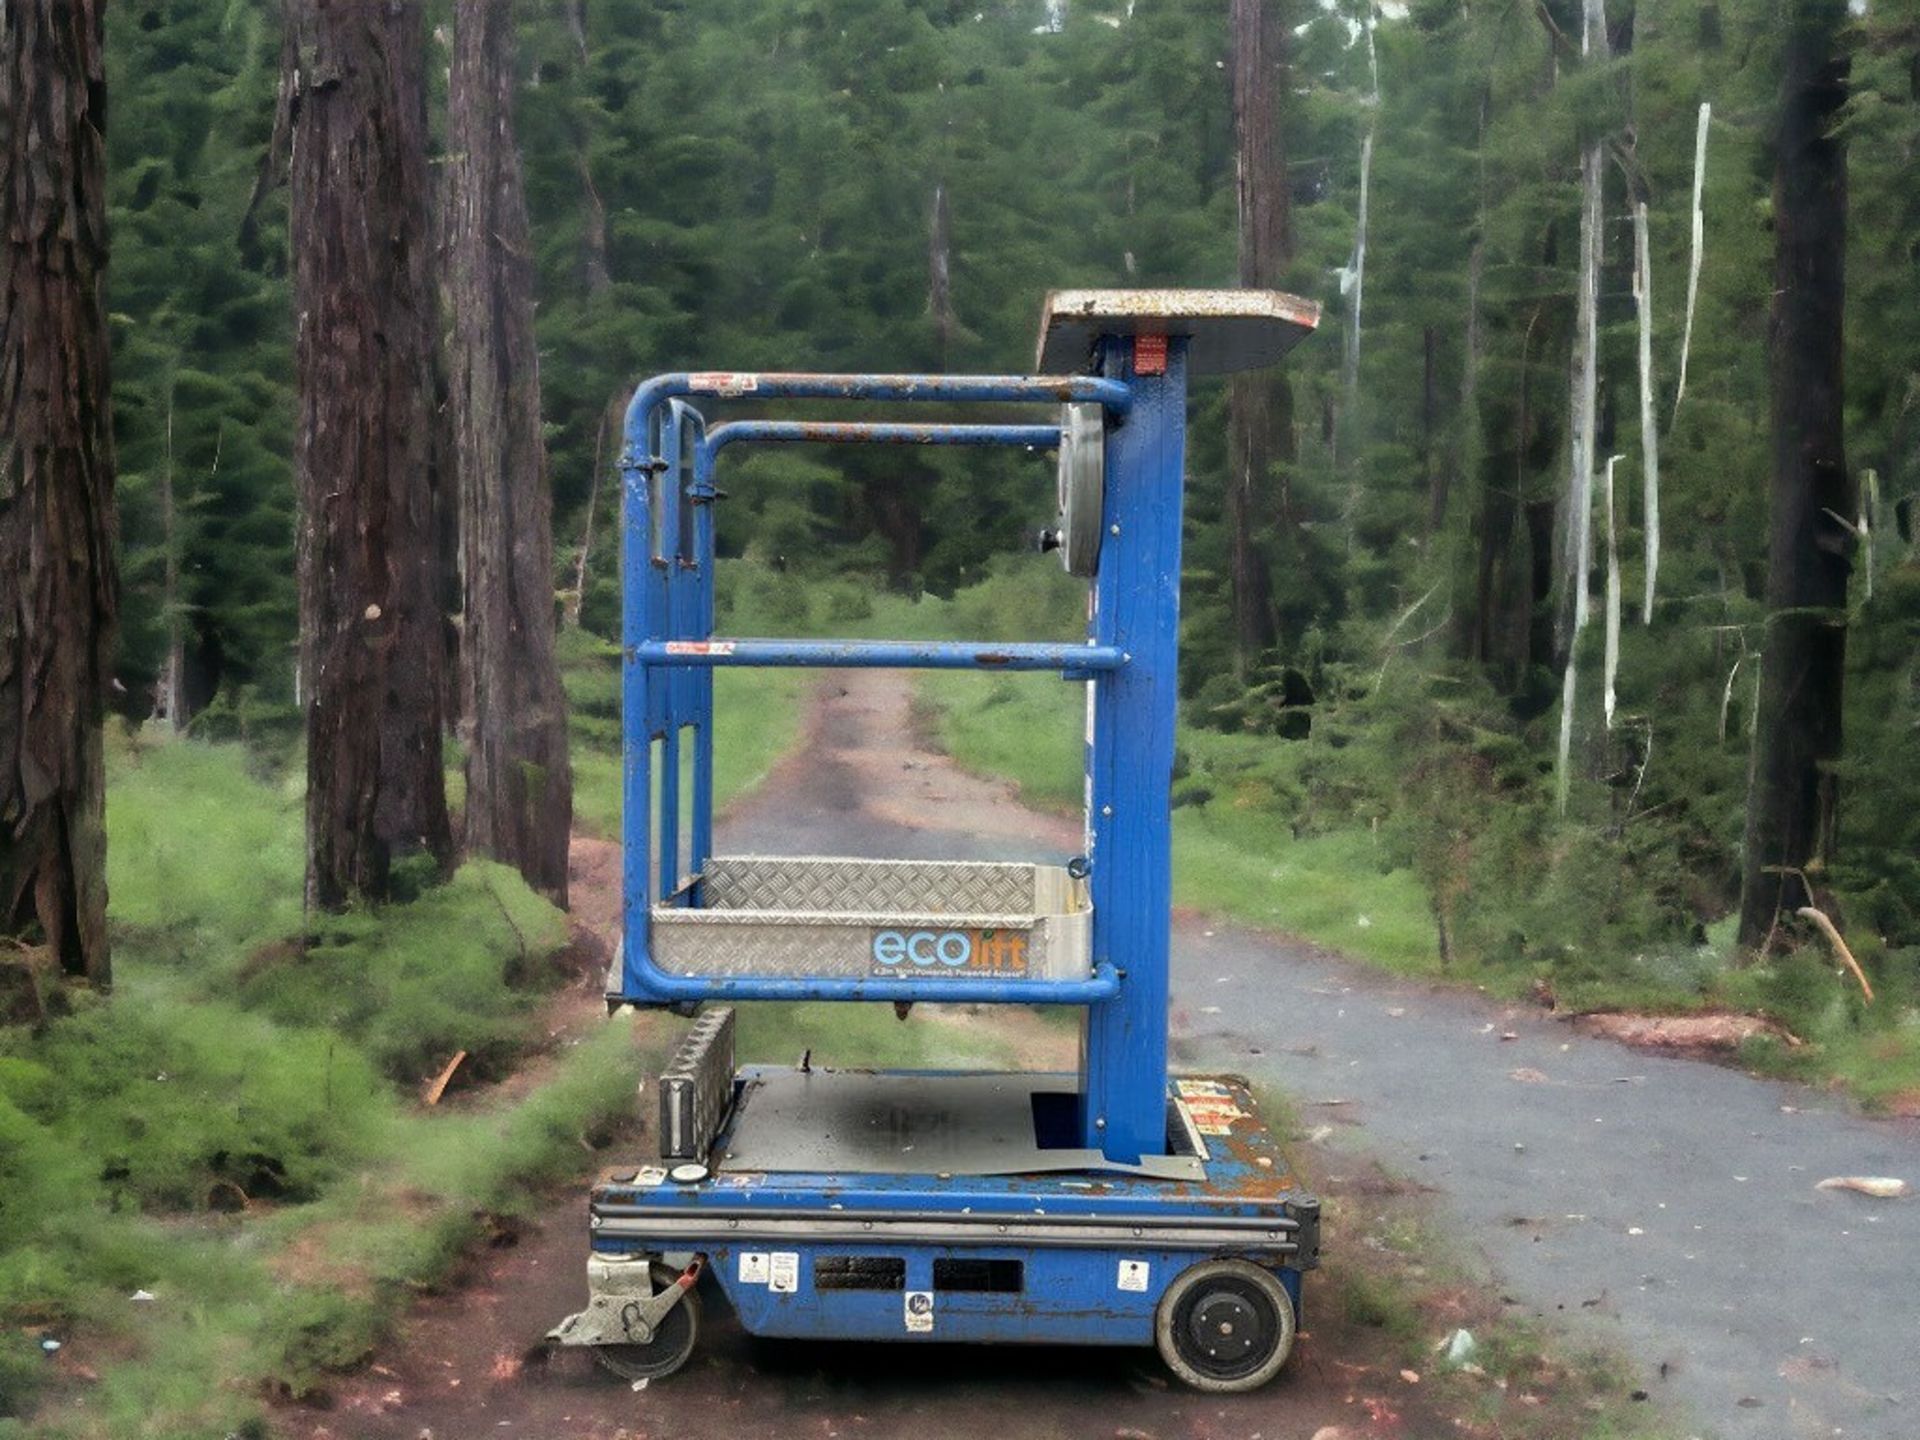 EFFICIENT AND PORTABLE: 2018 POWER TOWER ECOLIFT PUSH AROUND LIFT - Image 5 of 8